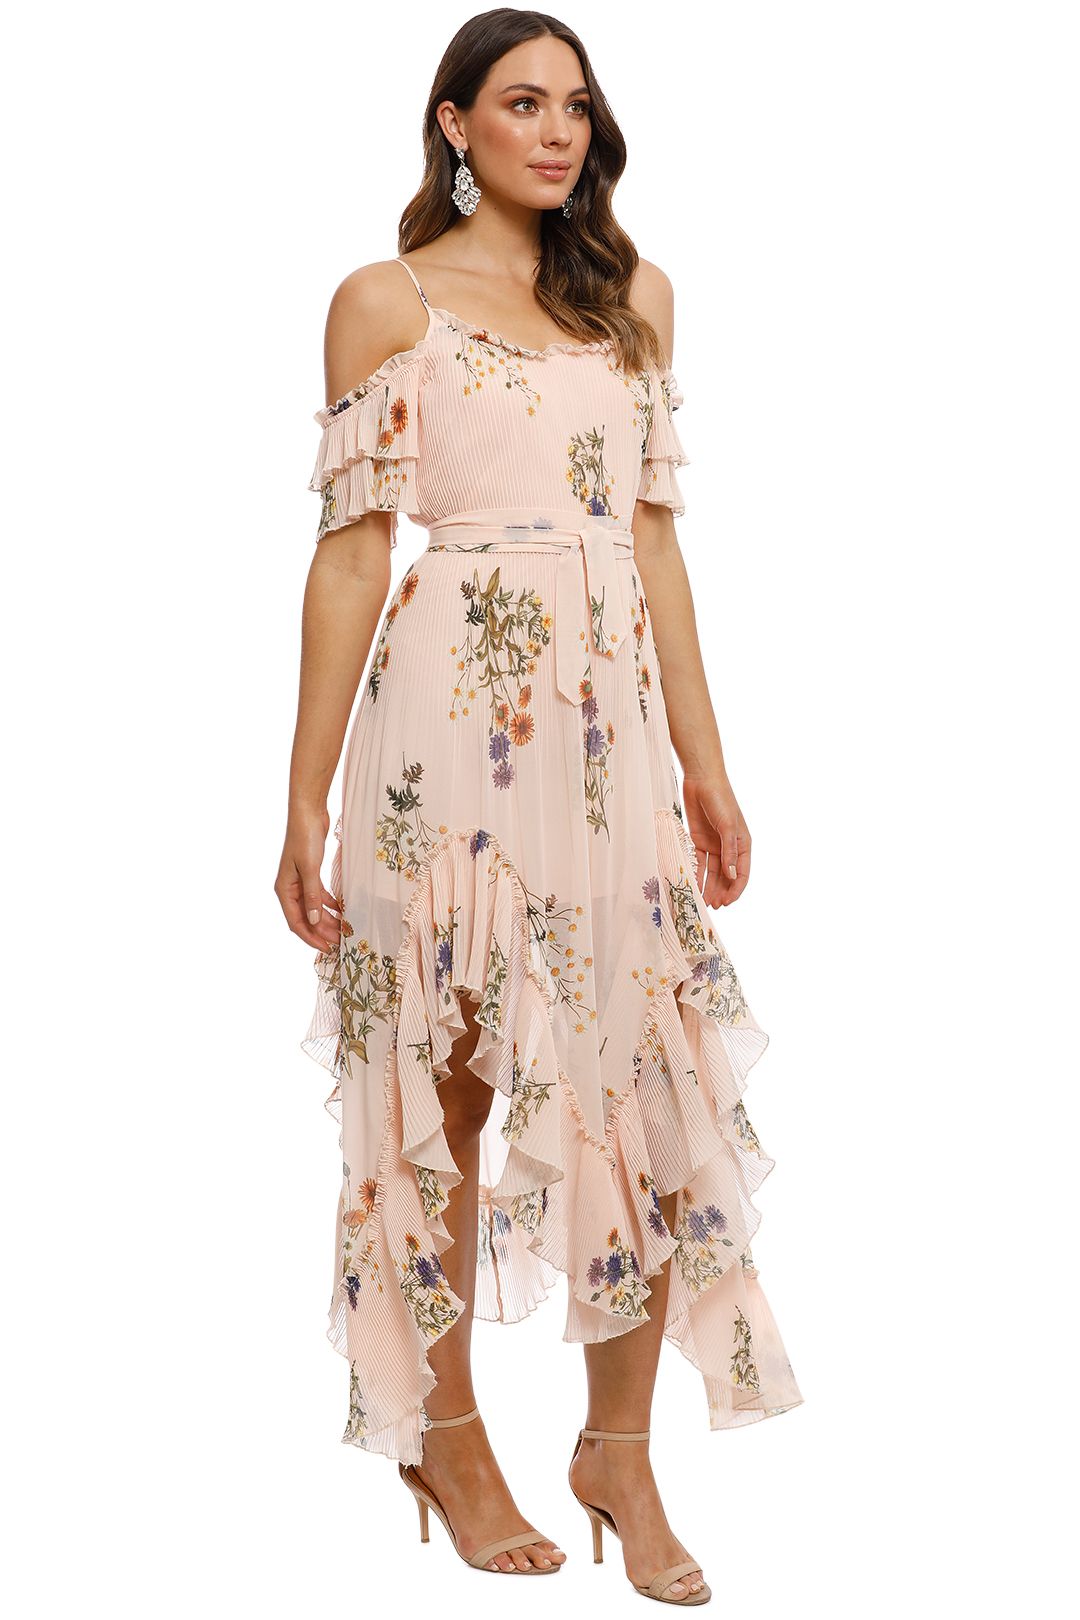 We Are Kindred - Country Field Maxi Dress - Blush - Side